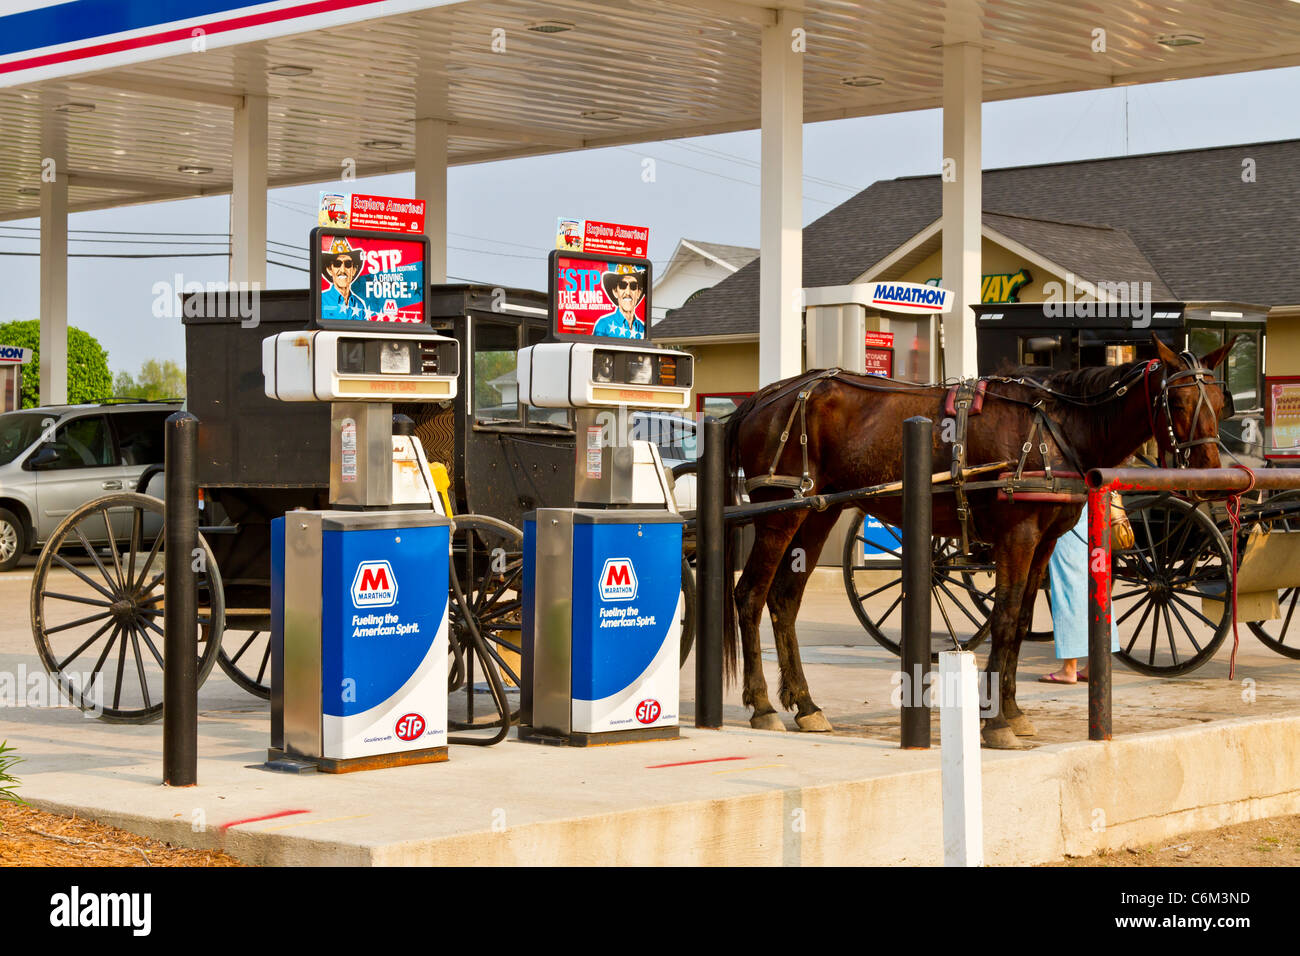 Amish horse and buggy hitched near a service station gasoline filling station in Shipshewana, Indiana, USA. Stock Photo